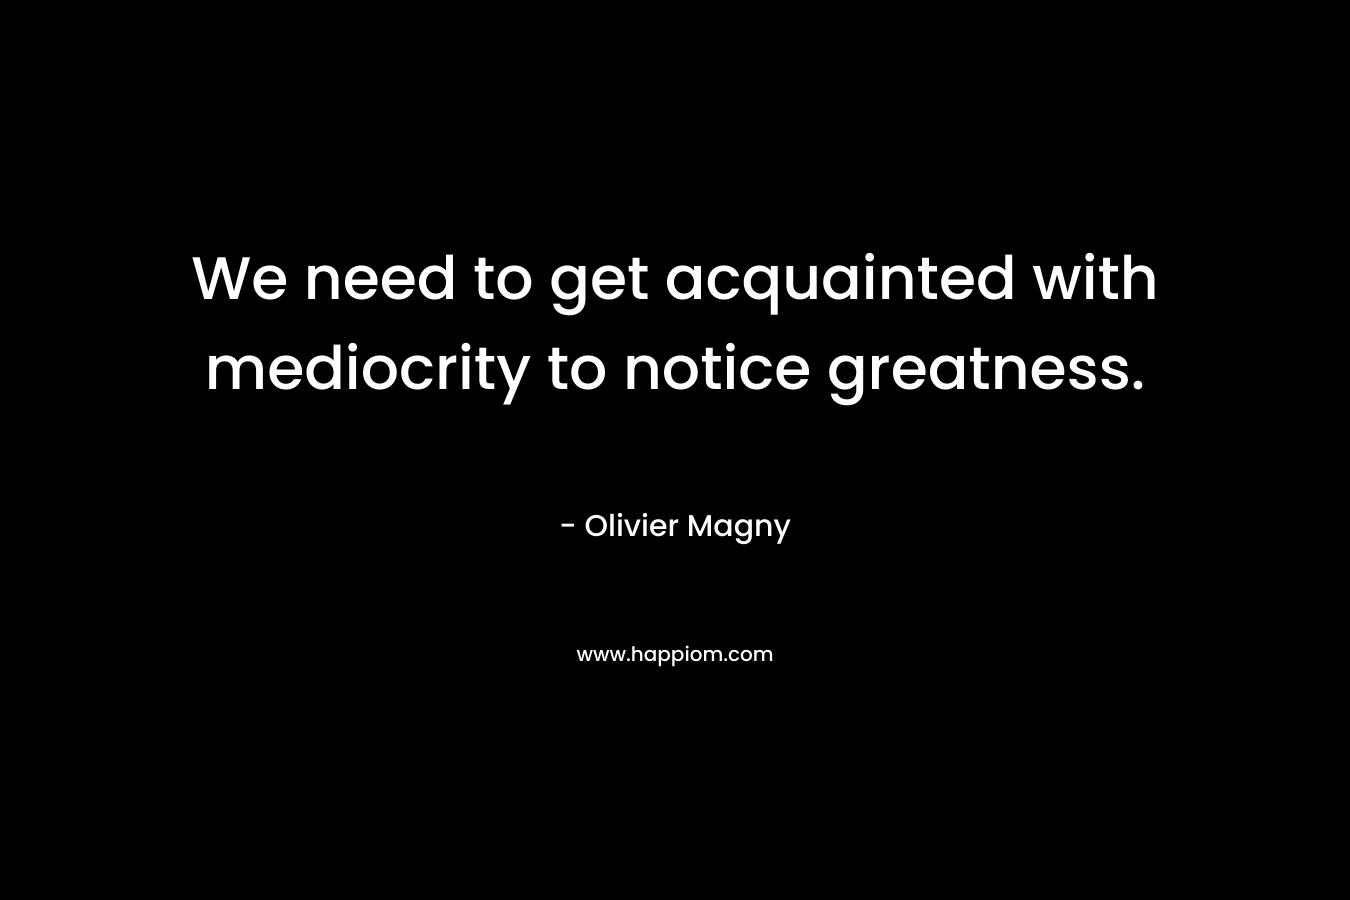 We need to get acquainted with mediocrity to notice greatness.